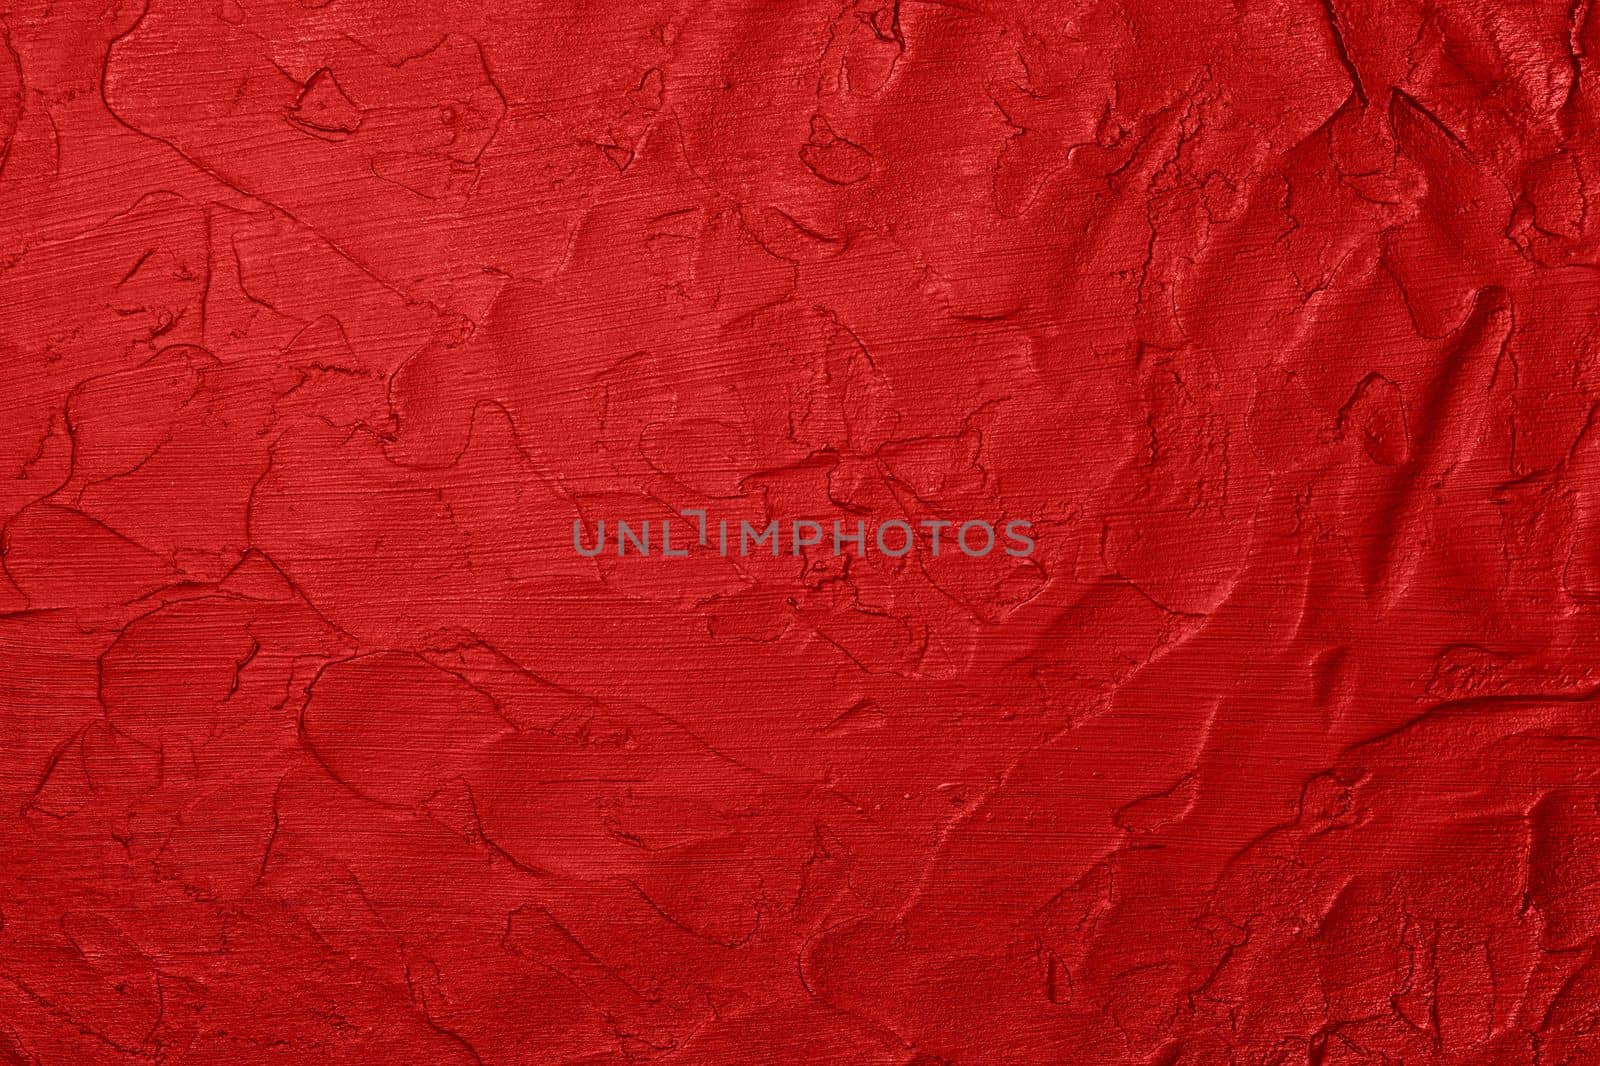 Close up vivid scarlet red abstract background texture of uneven grunge surface with brushstrokes of plaster and paint